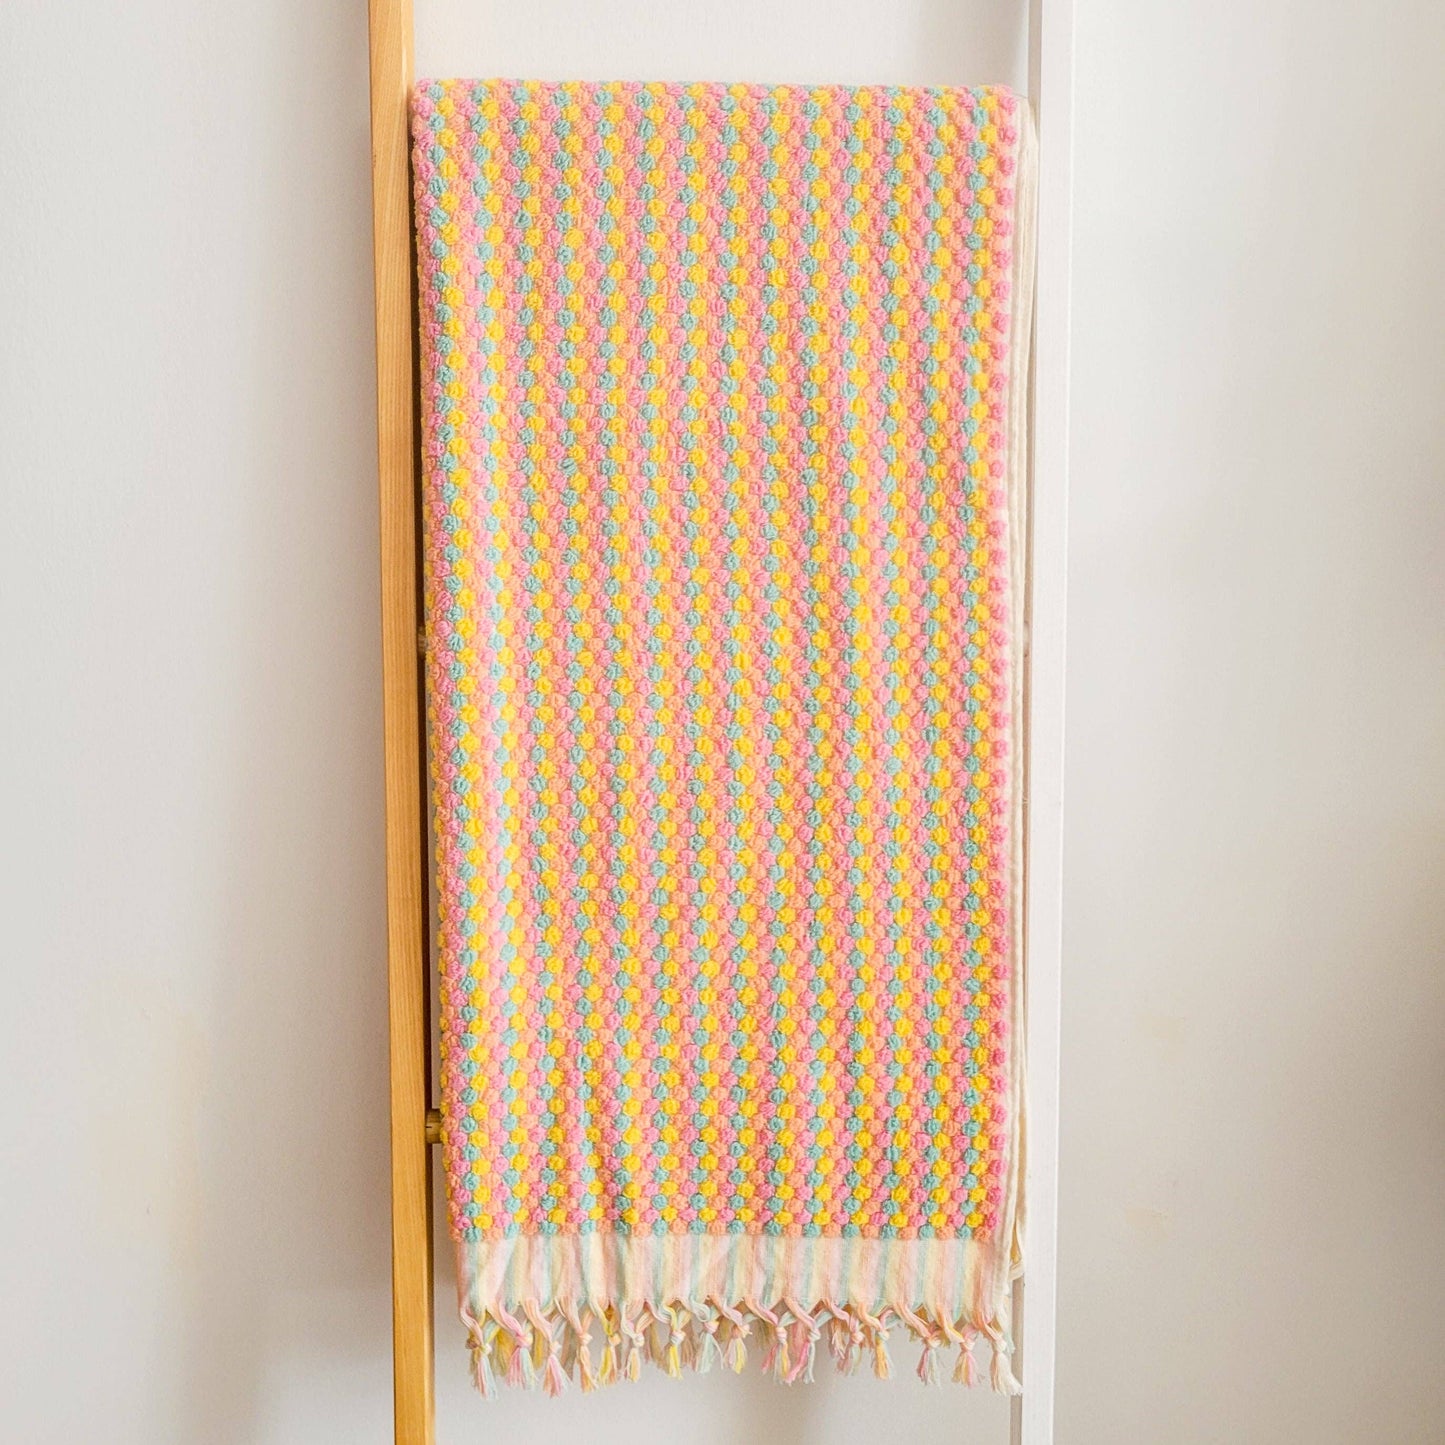 Marseille Dotted Body Towel - Pink Lemonade